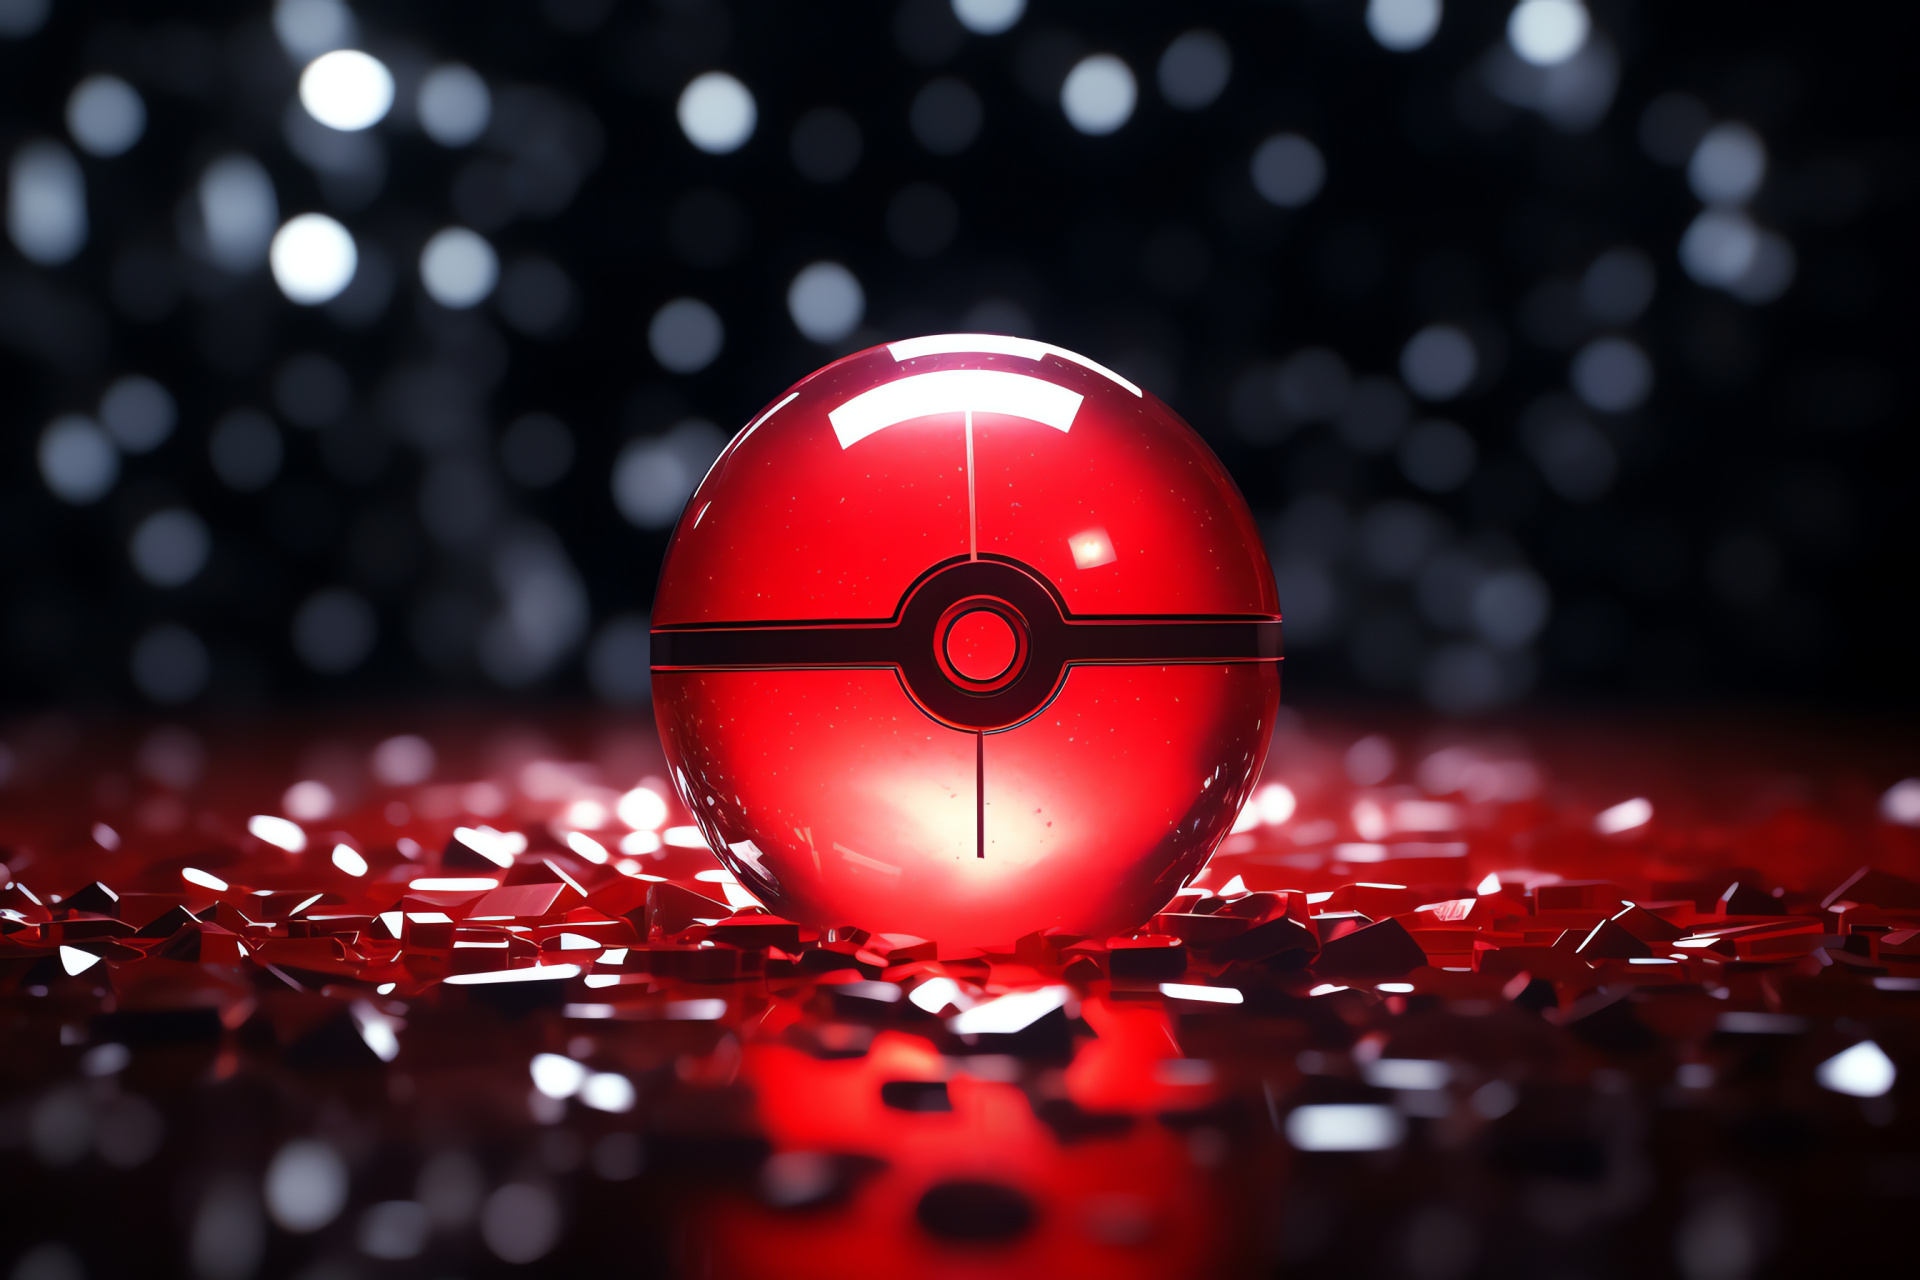 Pokeball, Gamers' collectible, Red sphere, Pokmon Trainer's tool, Iconic black center band, HD Desktop Wallpaper